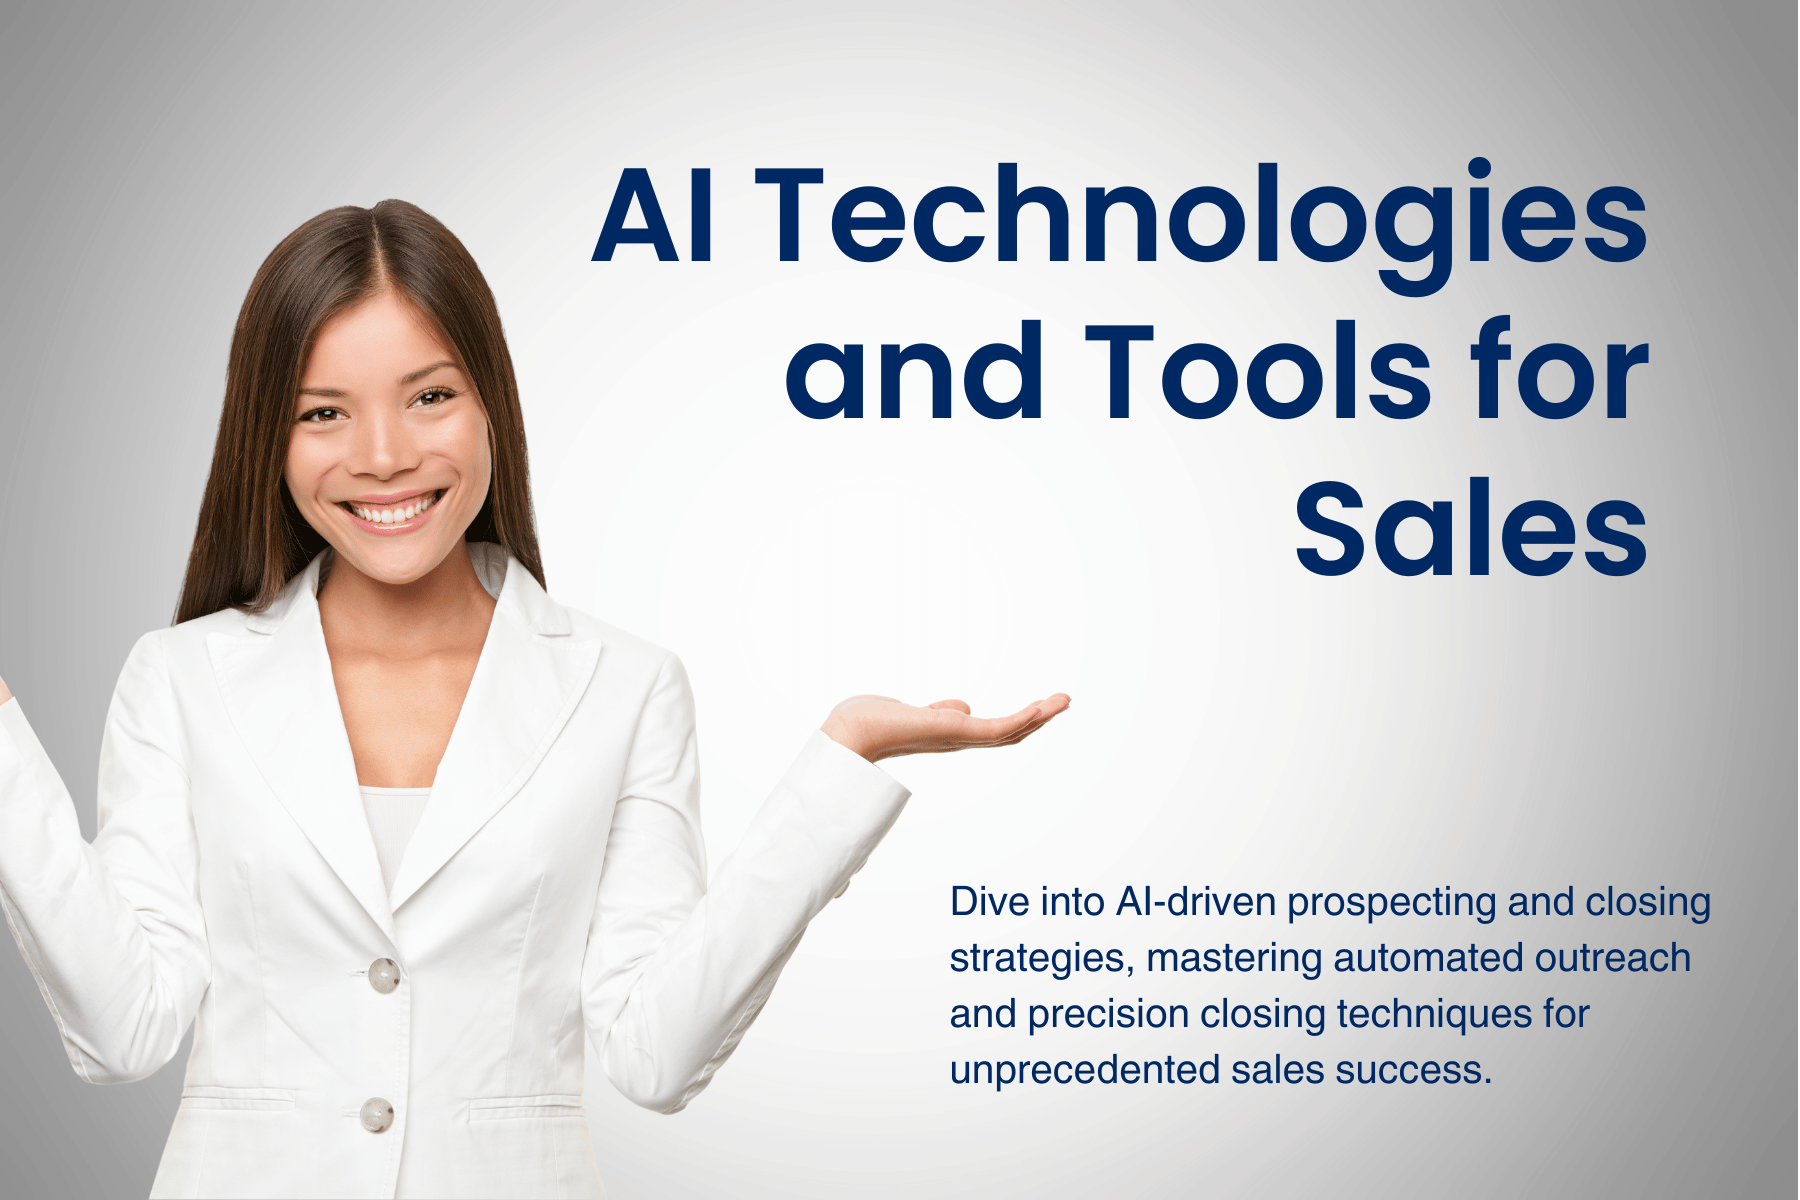 AI Technologies and Tools for Sales